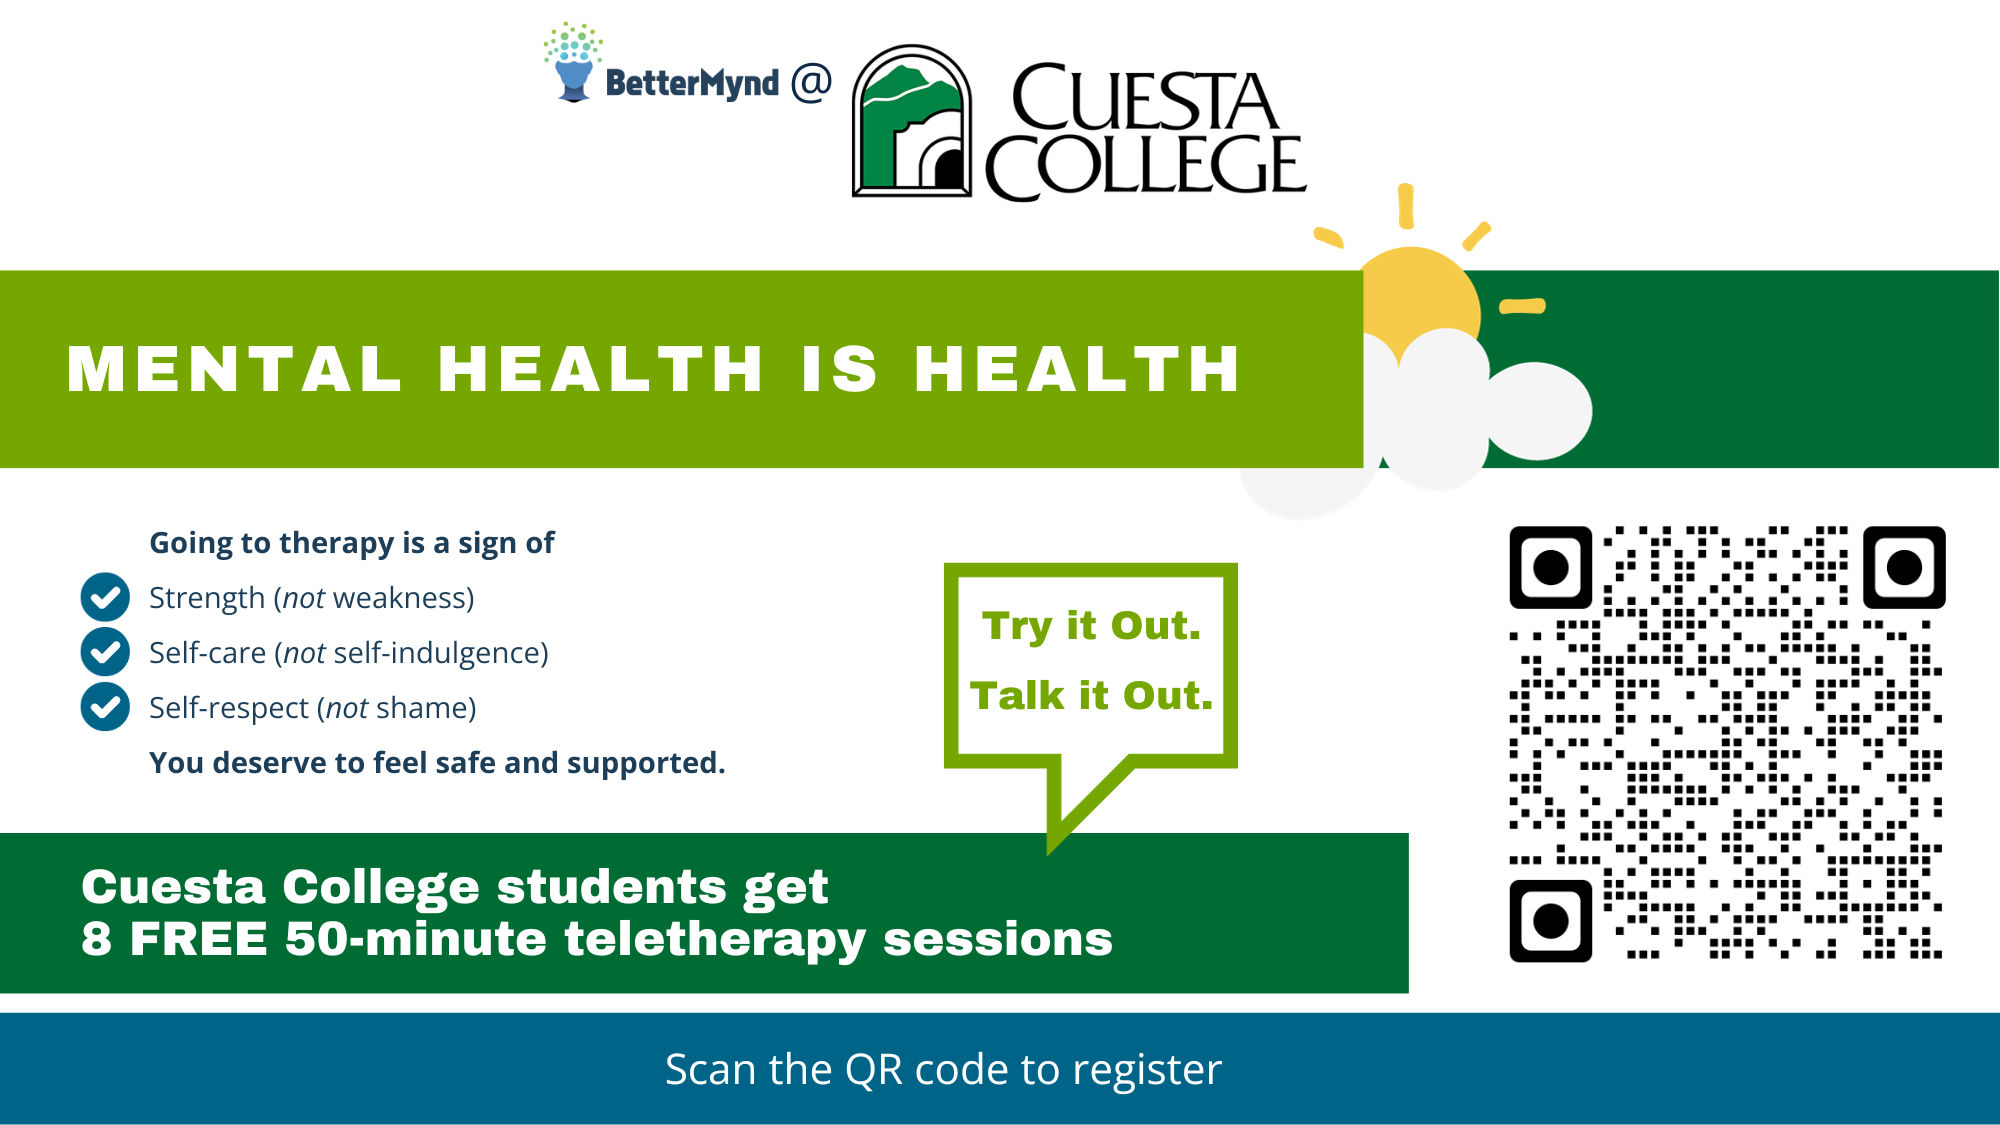 Cuesta College in with partnership with BetterMynd is offering 8 free 50-minute teletherapy sessions to Cuesta College students. Scan the QR code to register